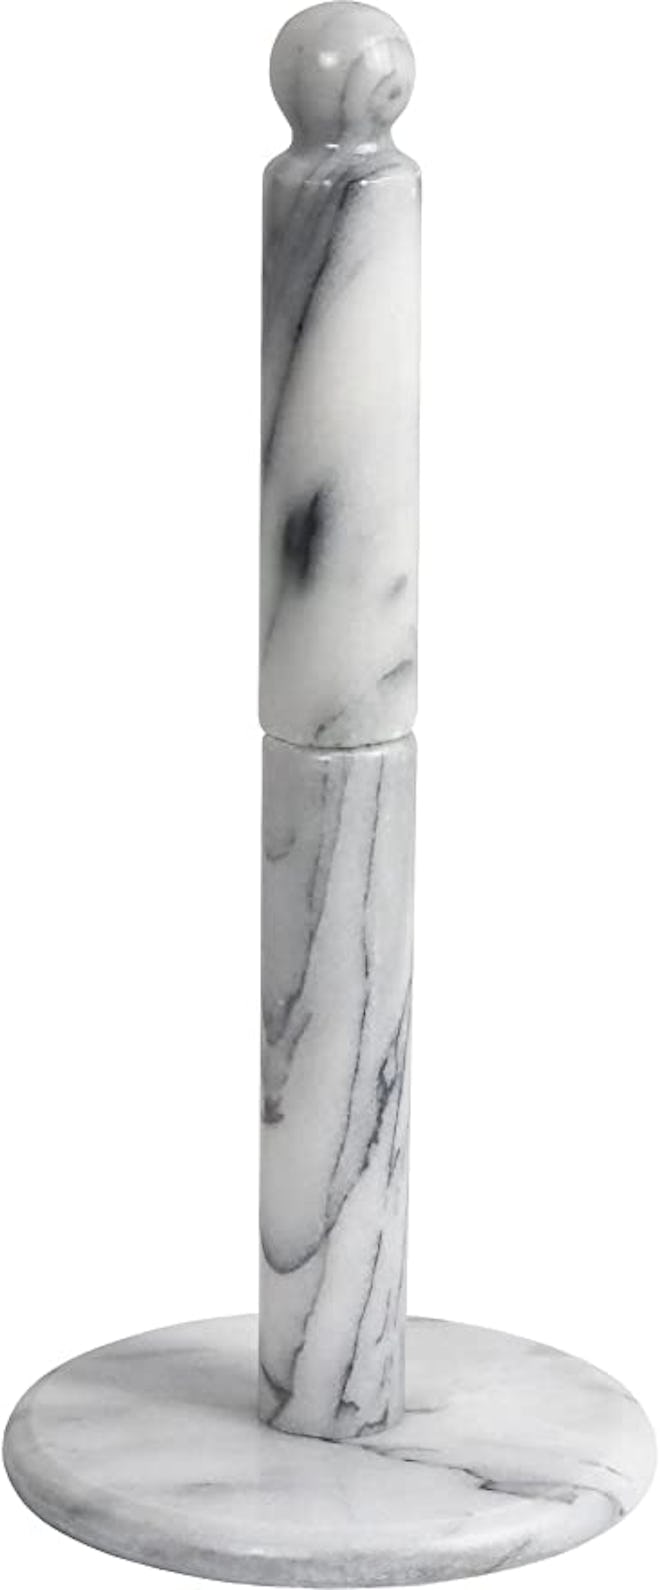 Greenco Hand Crafted Marble Paper Towel Holder